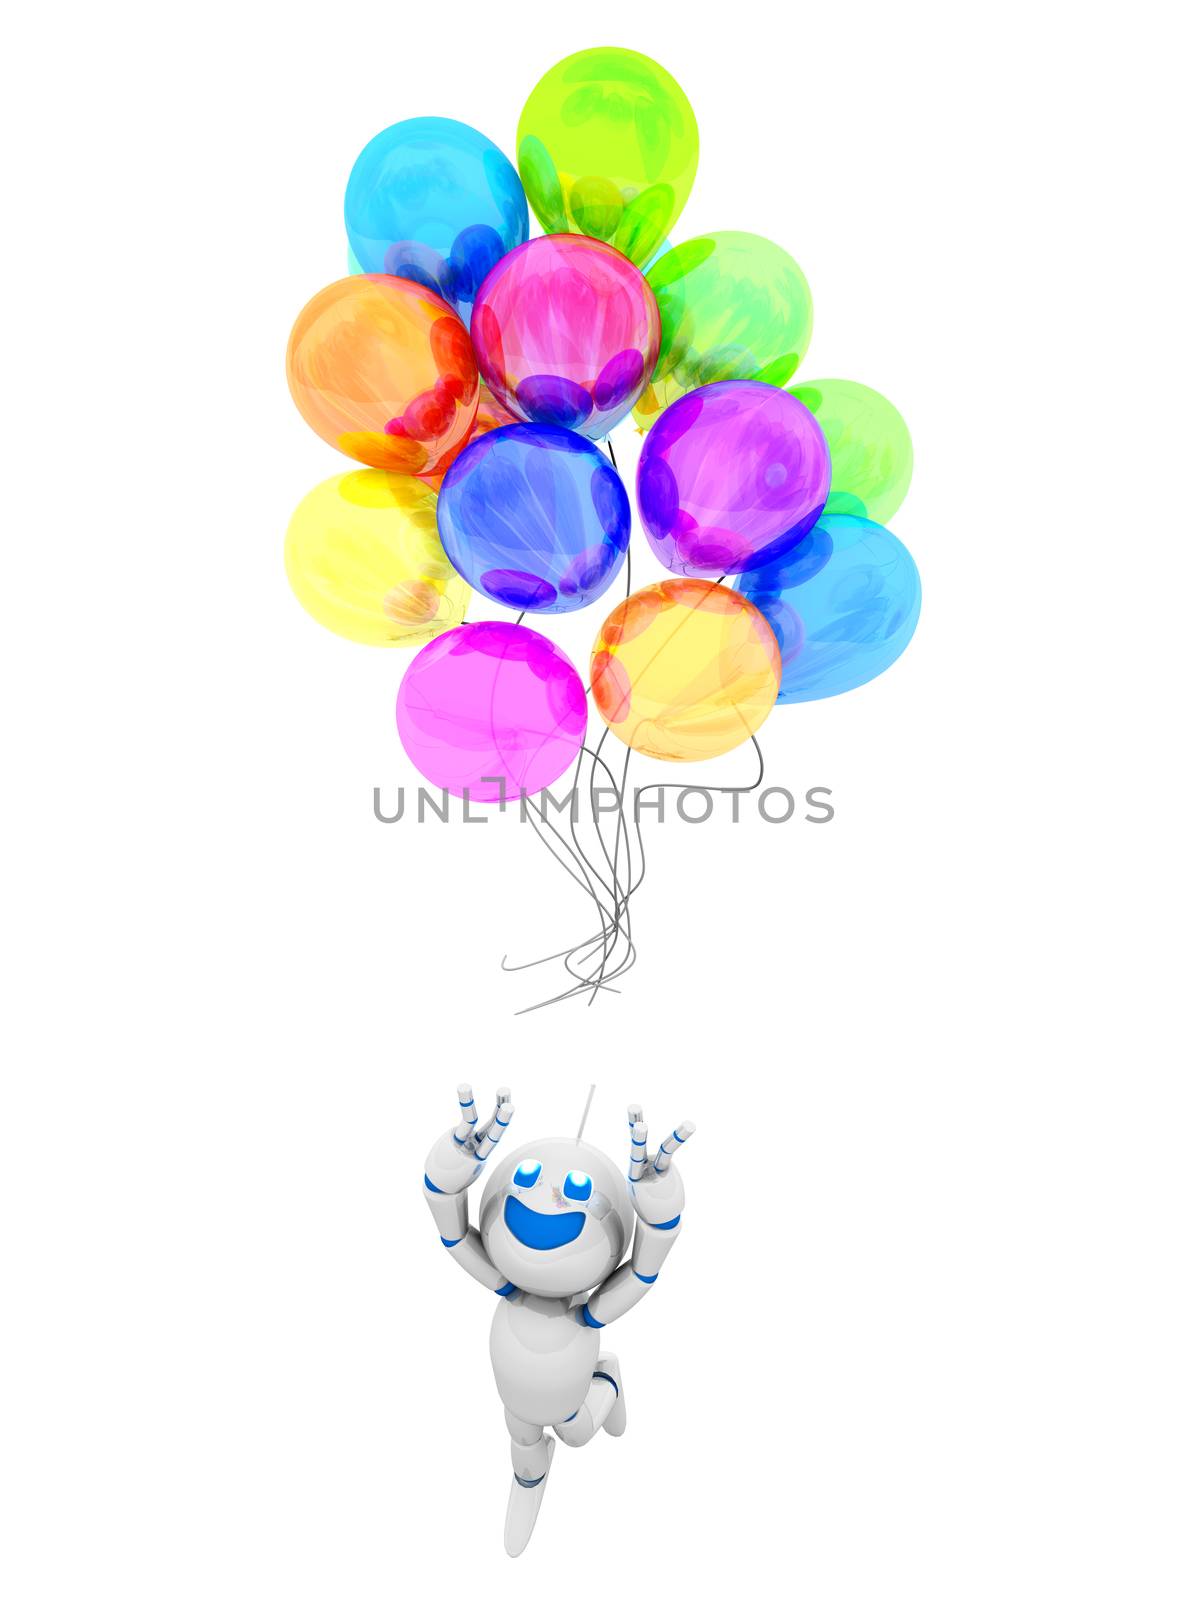 Cartoon Robot losing its Balloons by Spectral